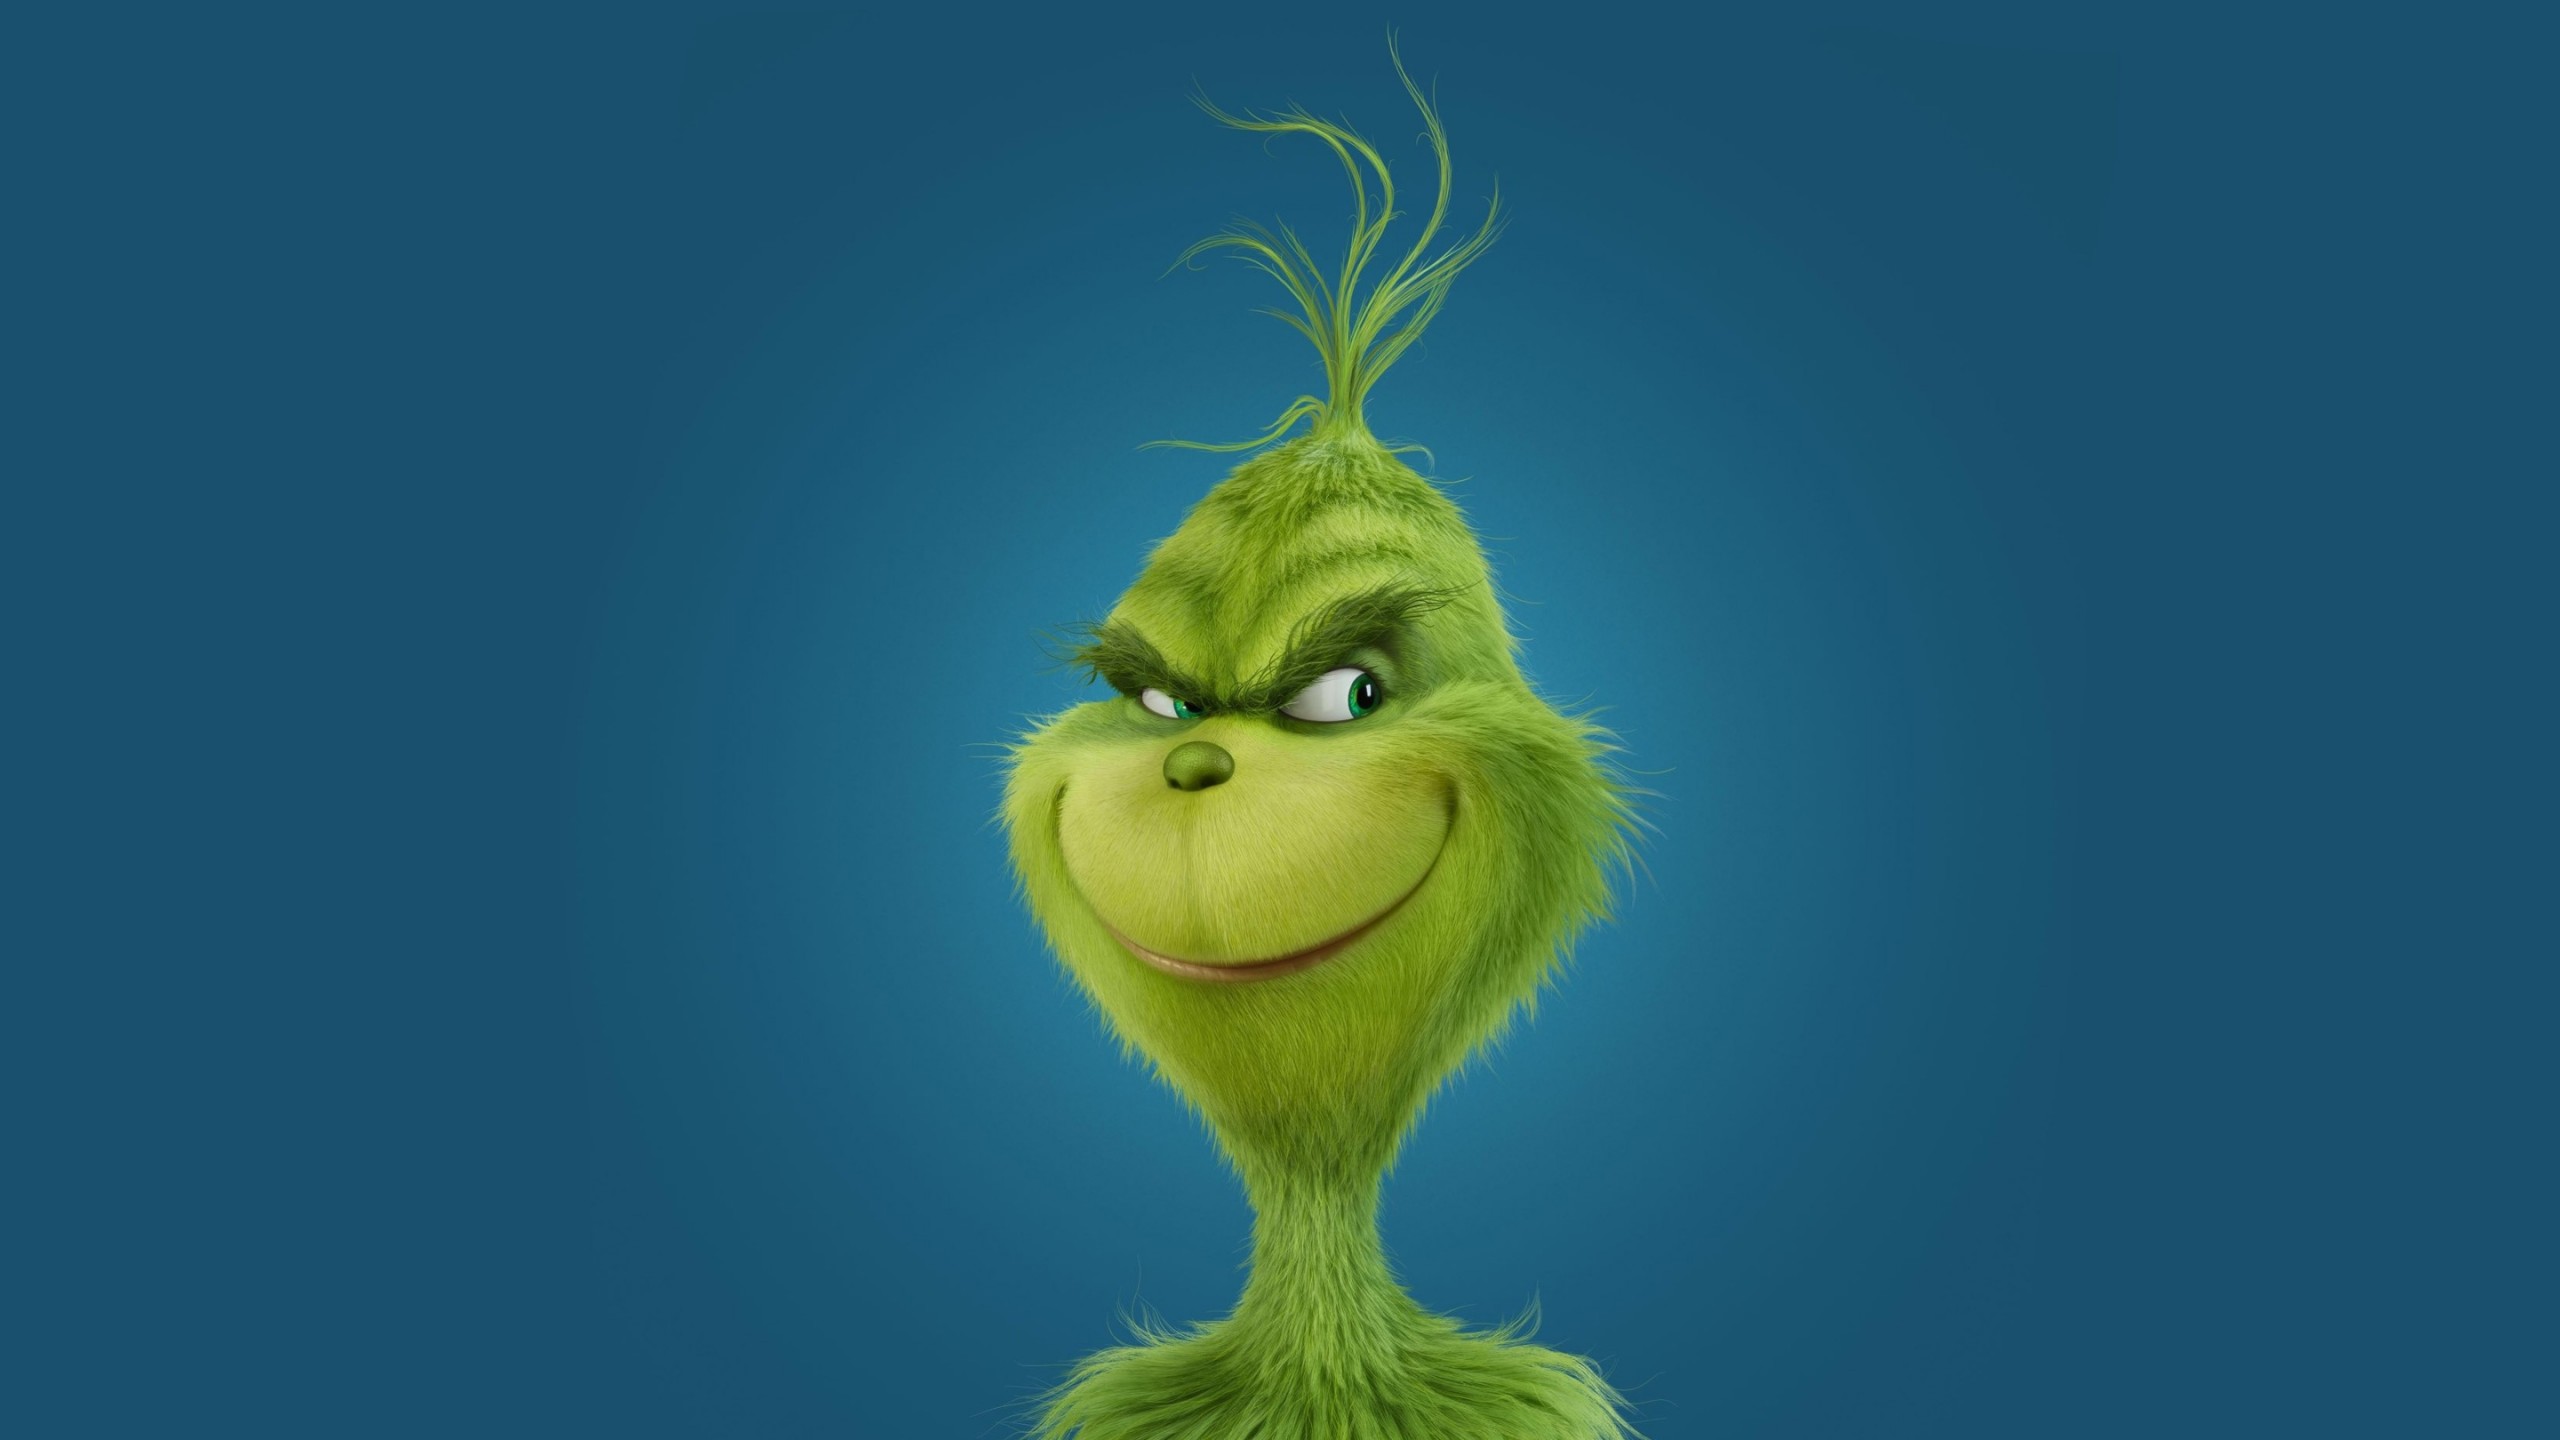 The Grinch Wallpaper for Desktop and Mobiles - Youtube Cover Photo.